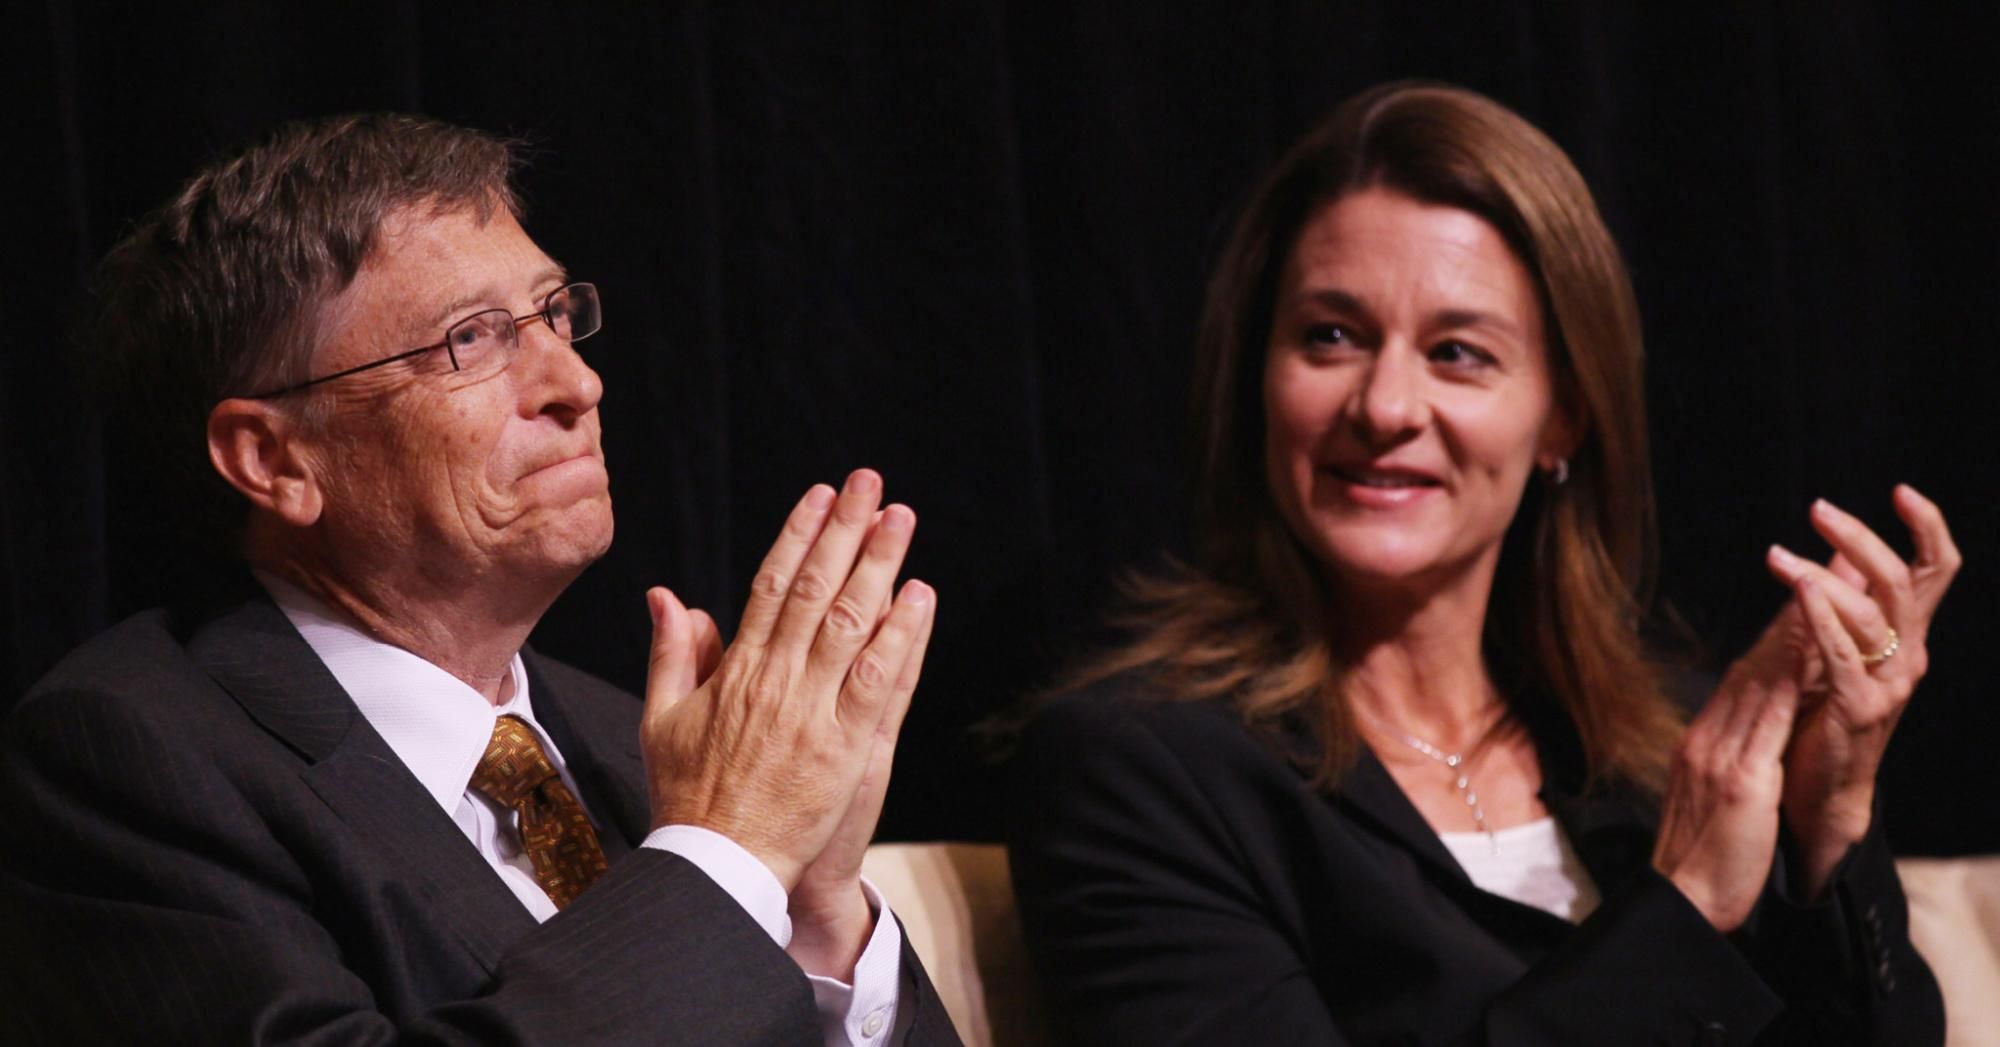 Microsoft chairman Bill Gates and his wife Melinda attend a ceremony presenting them with the 2010 J. William Fulbright Prize for International Understanding at the Library of Congress on October 15, 2010 in Washington, D.C. (Photo: Win McNamee via Getty Images)